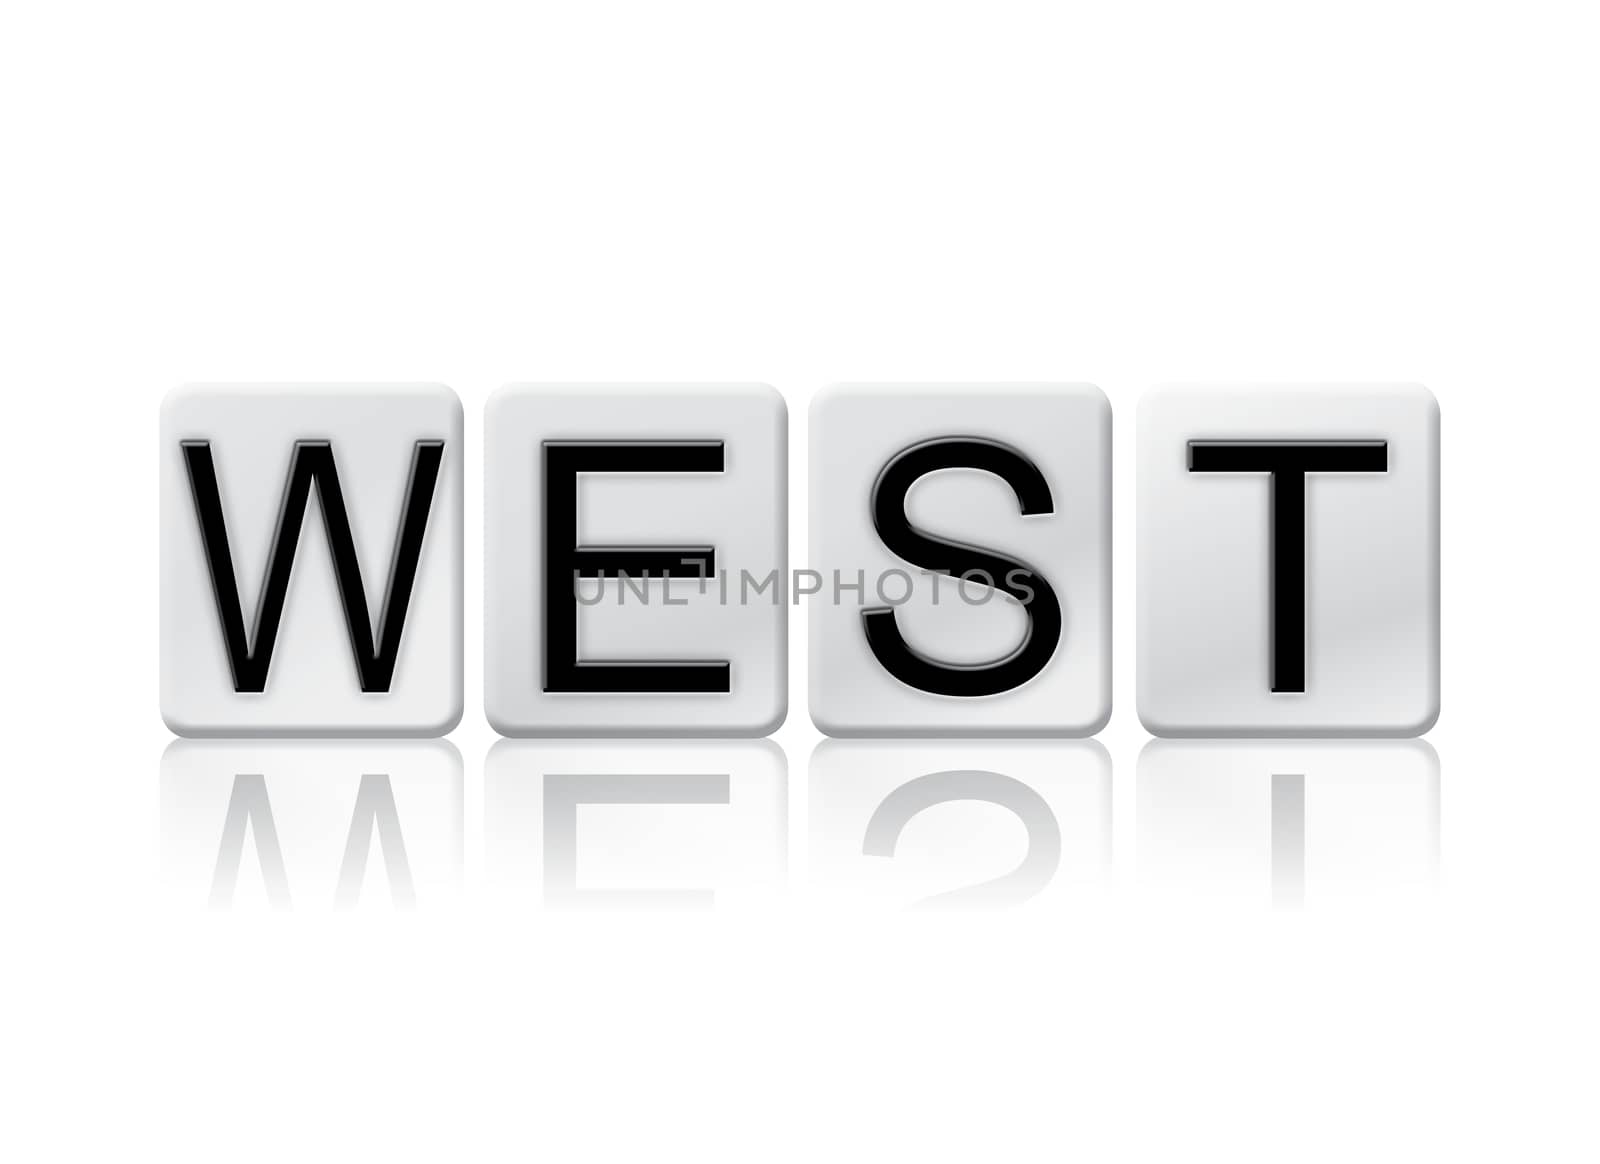 West Isolated Tiled Letters Concept and Theme by enterlinedesign